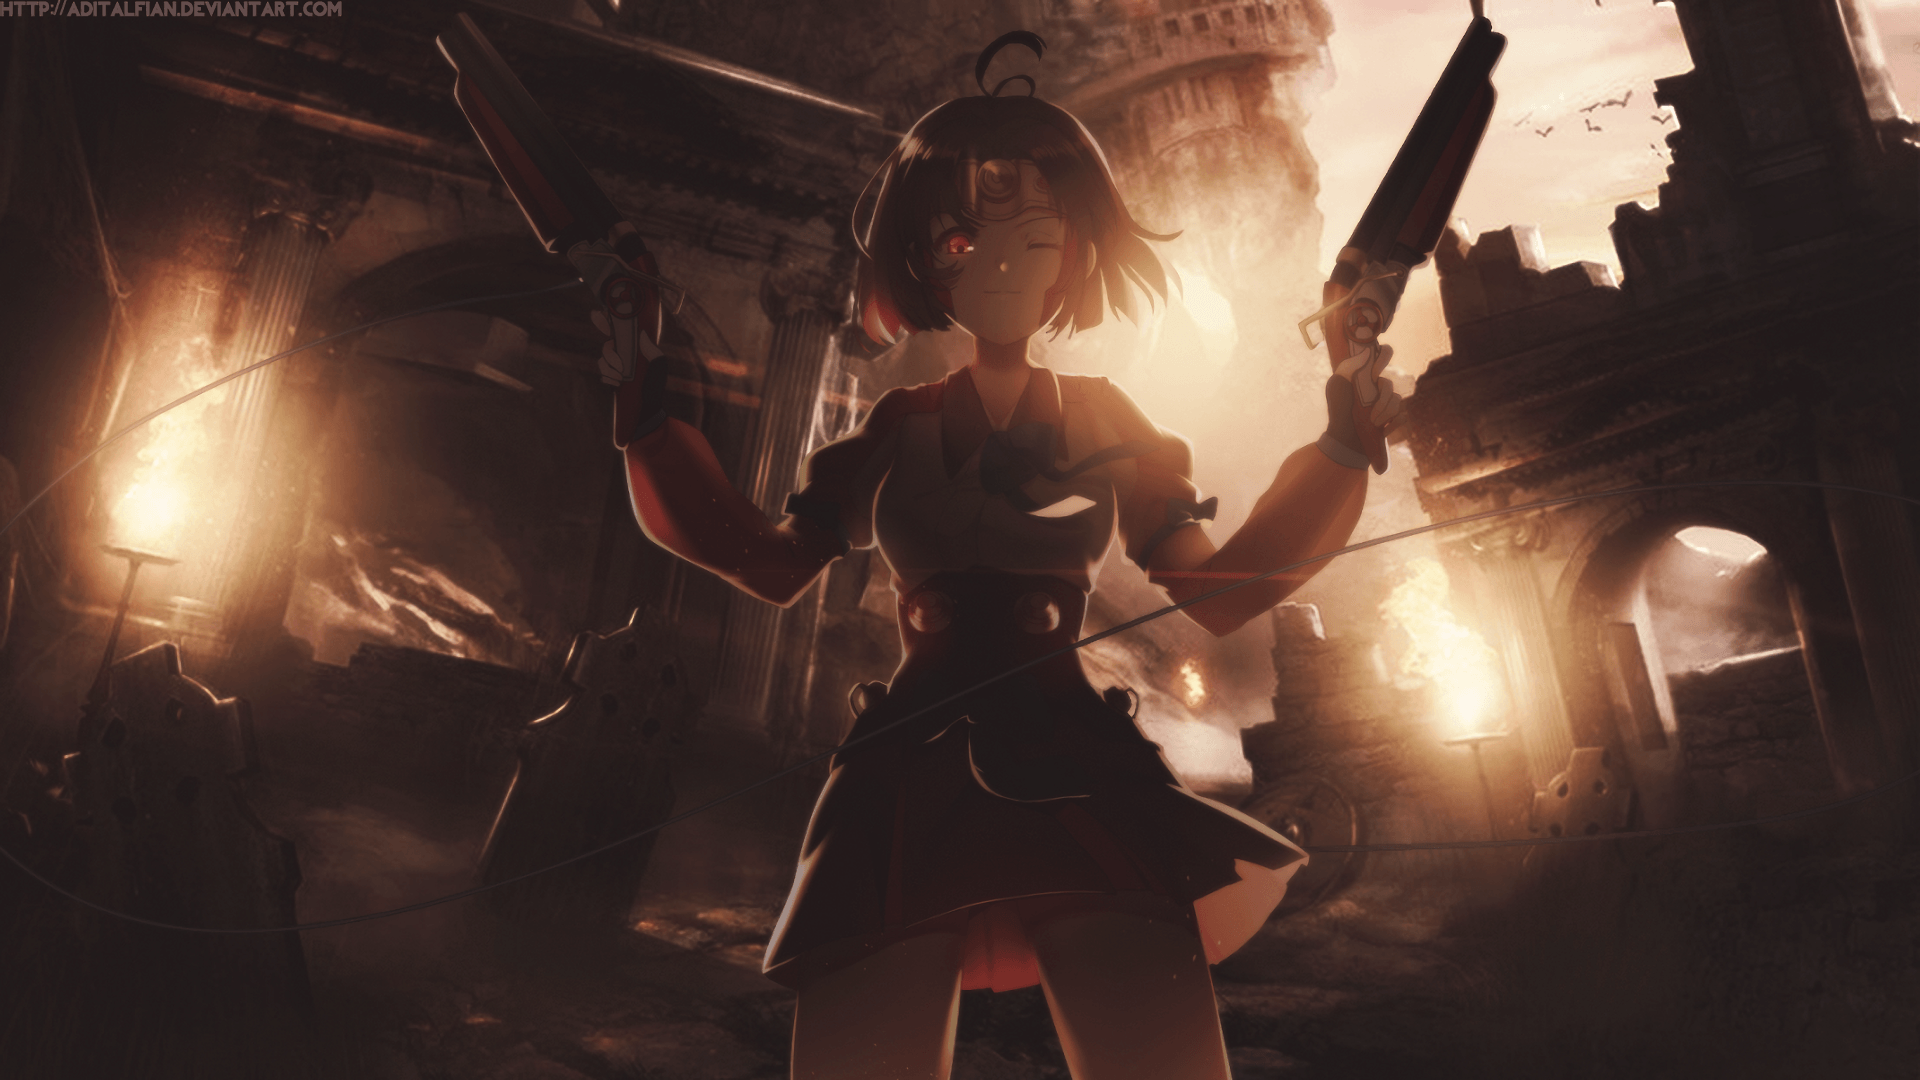 Kabaneri of the Iron Fortress HD Wallpaper. Background